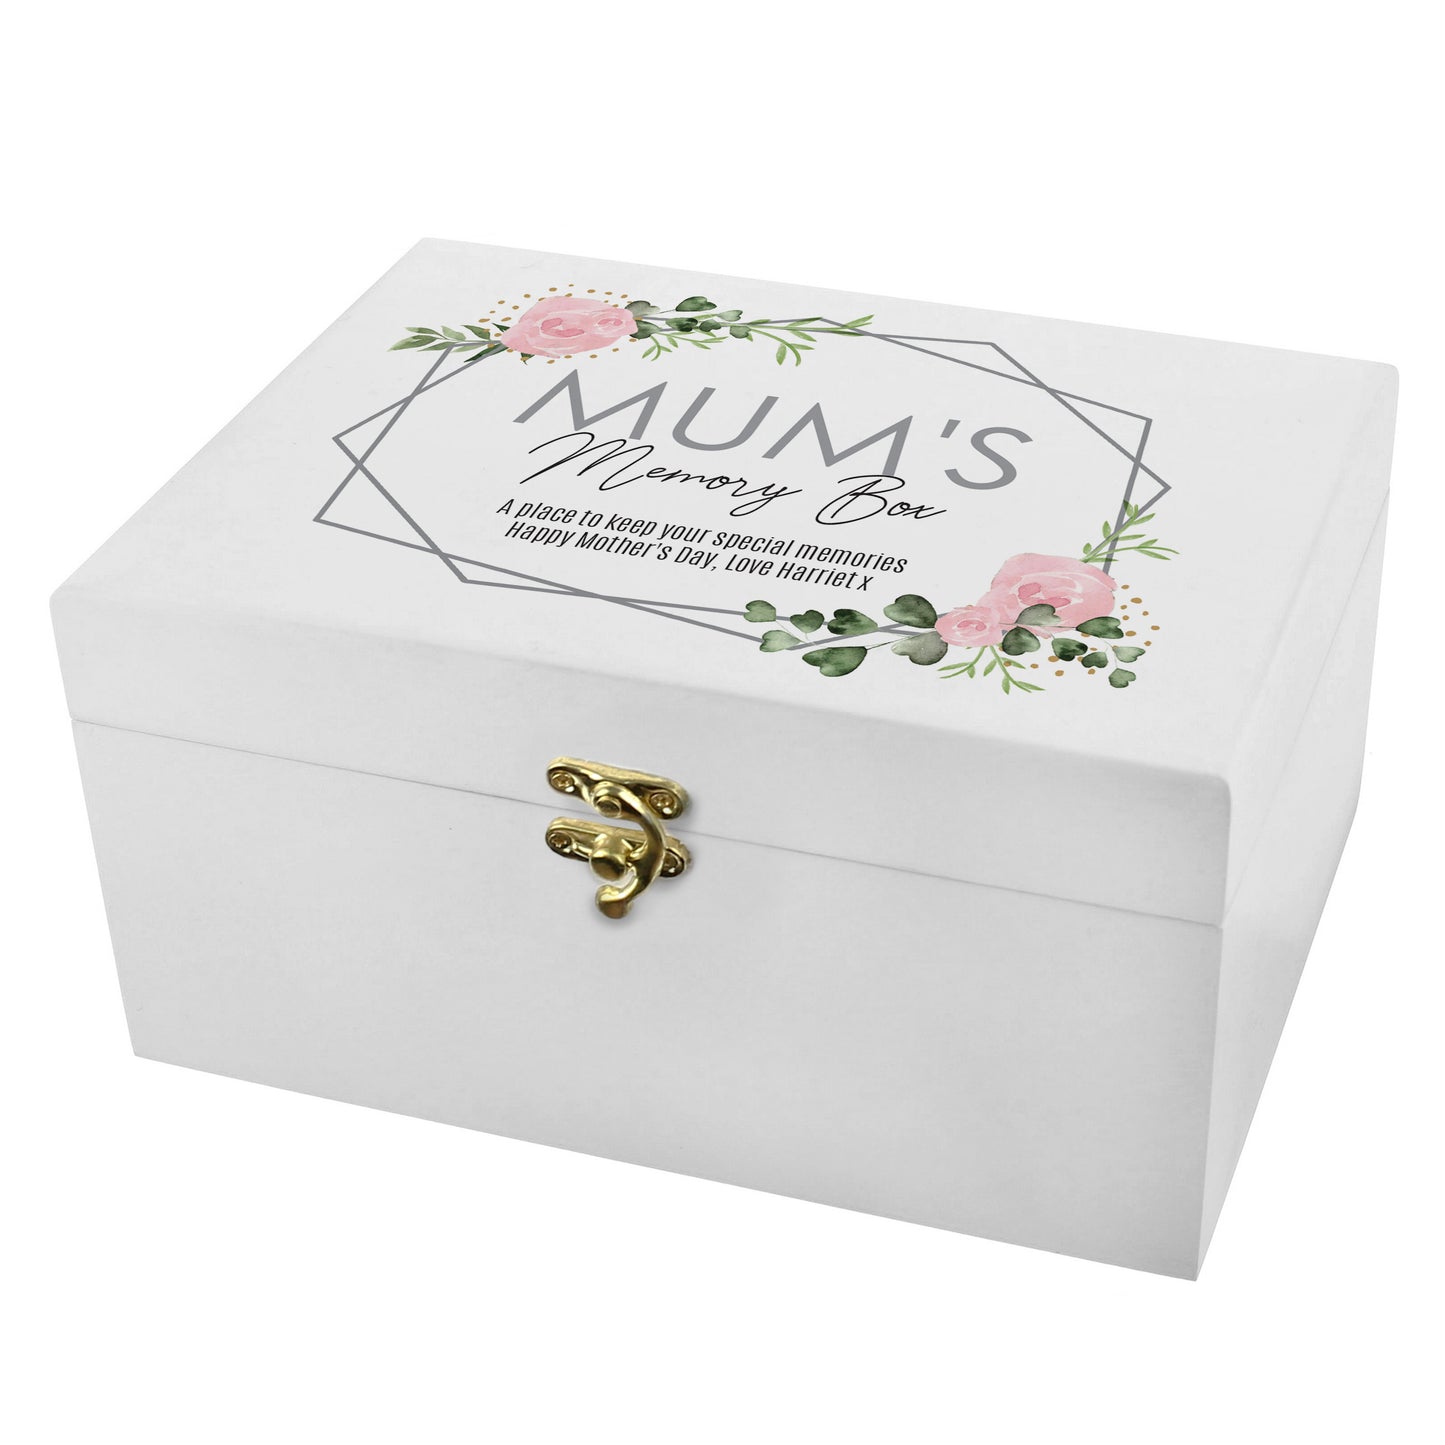 Personalised Abstract Rose White Wooden Keepsake Box - Mother's Day, Birthday, Grandmother Gift Ideas